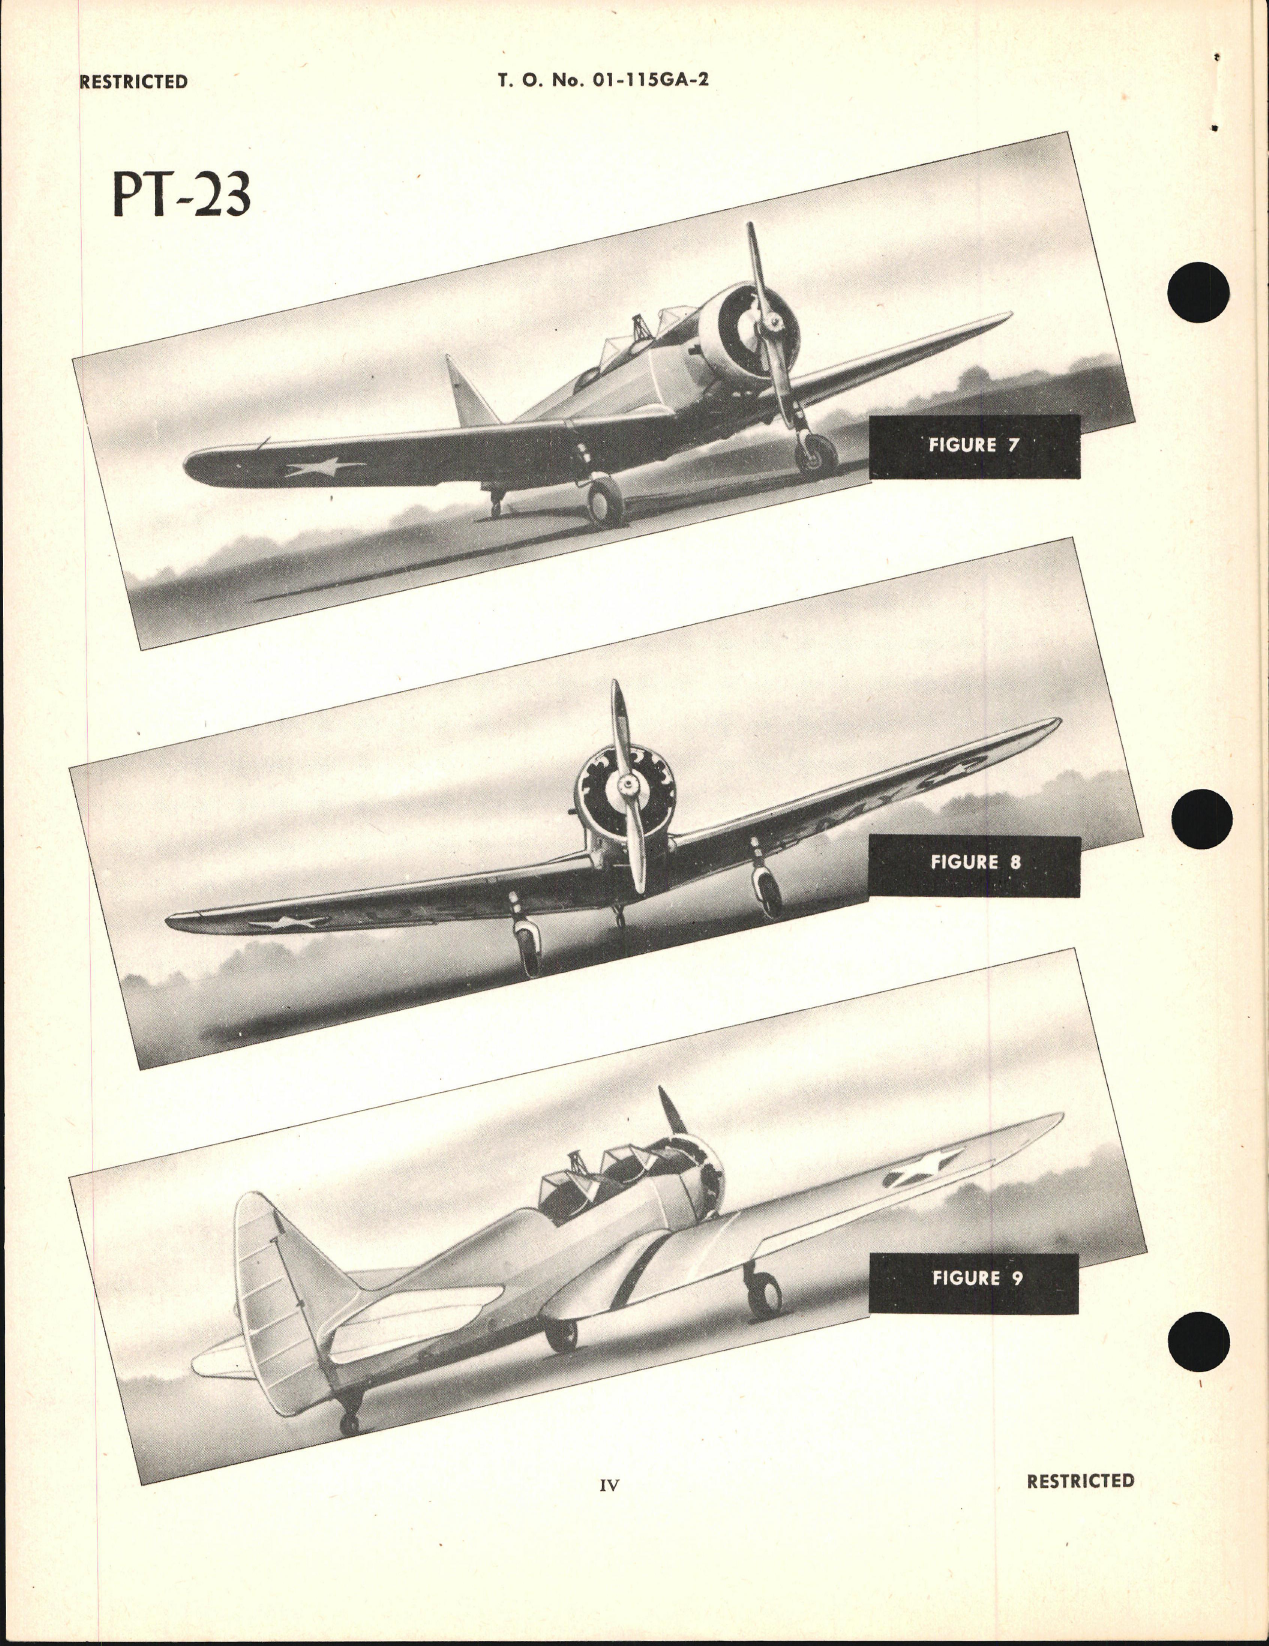 Sample page 6 from AirCorps Library document: Erection and Maintenance Instructions for PT-19, A, B, PT-23, and -26